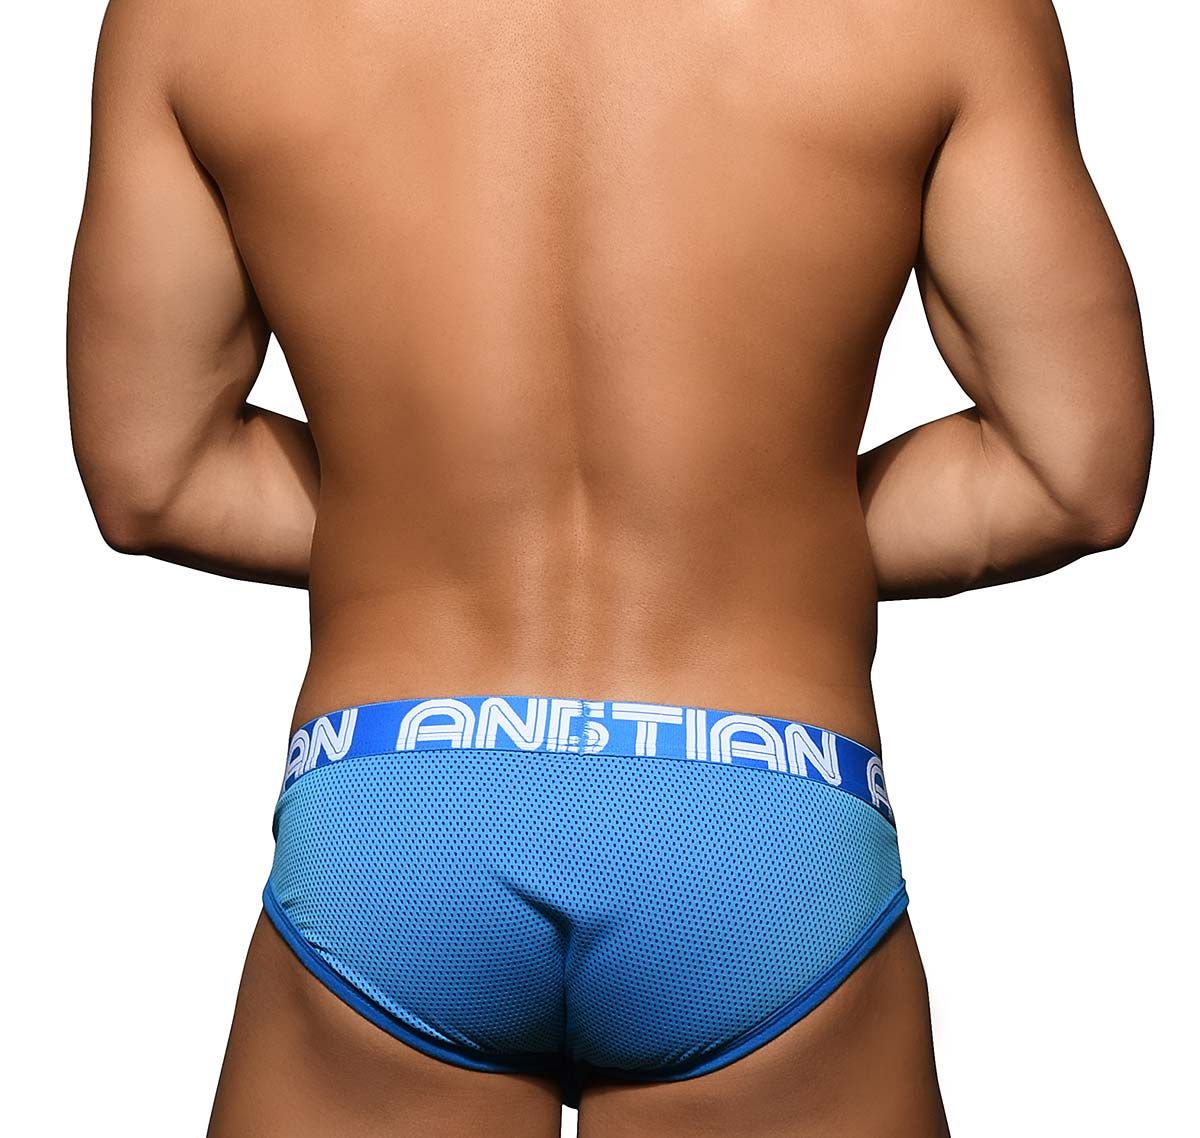 Andrew Christian Slip CANDY POP MESH FRAME BRIEF w/ Almost Naked 92760, blu